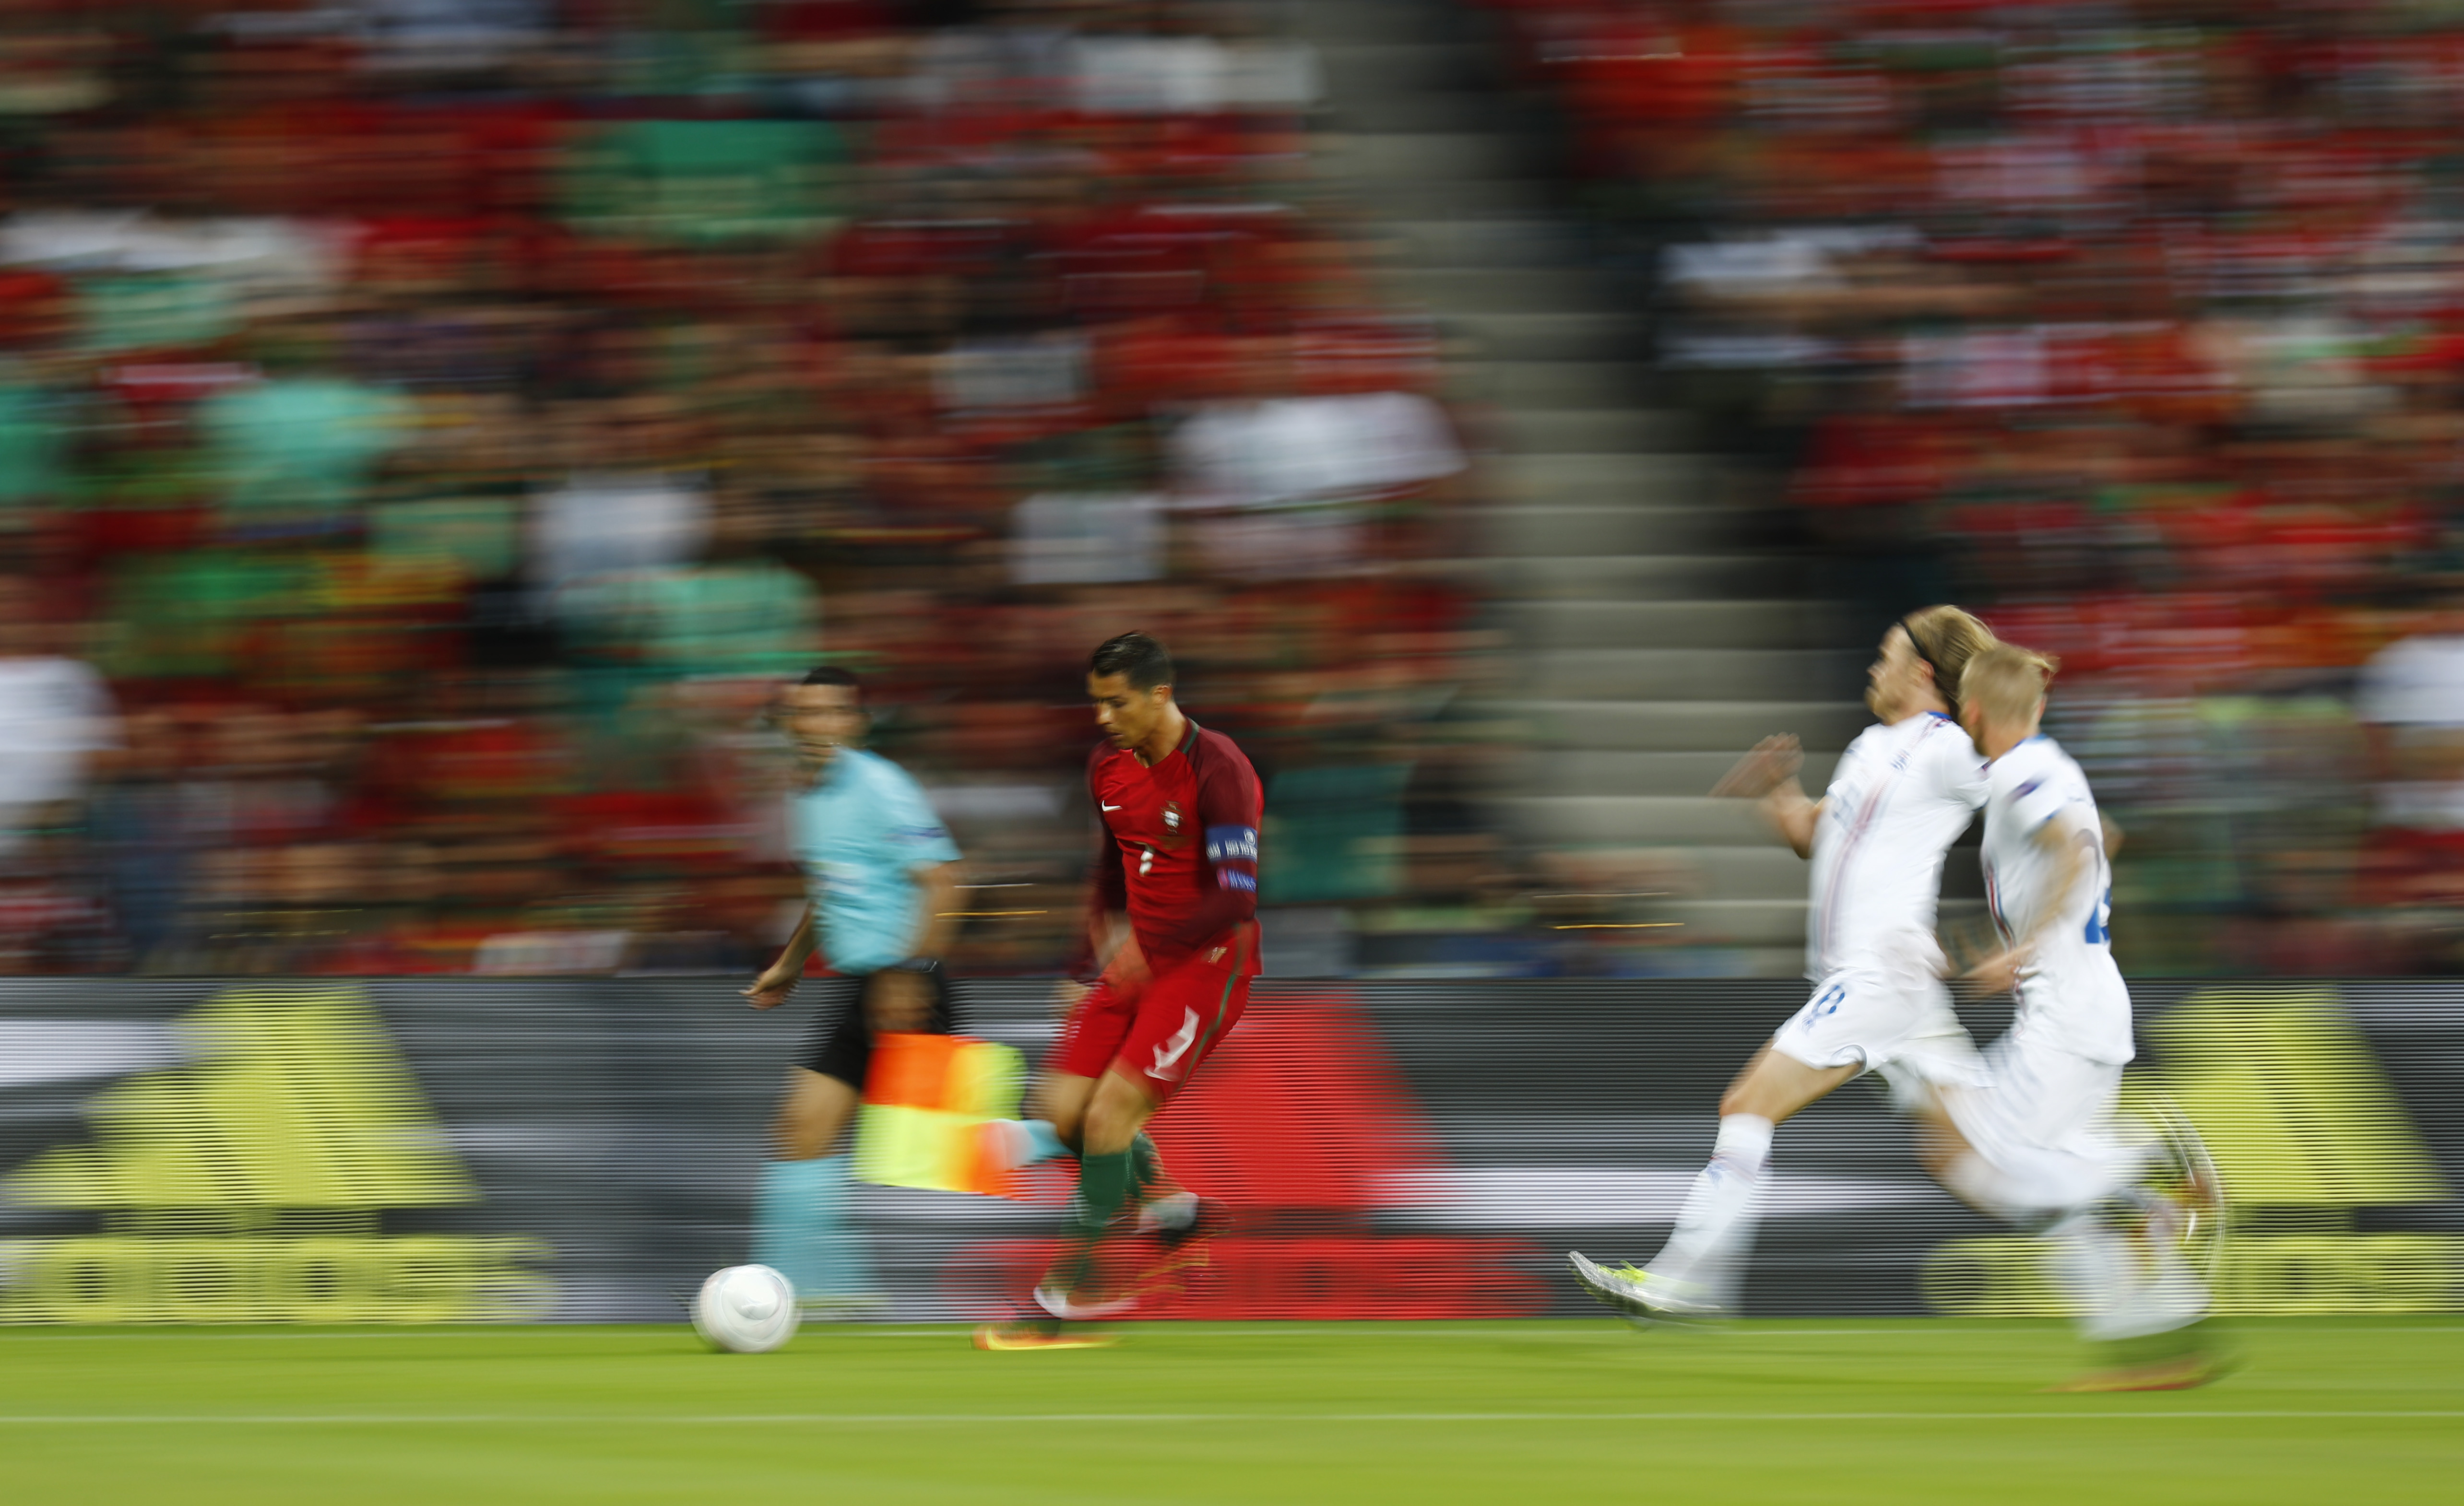 Football Soccer - Portugal v Iceland - EURO 2016 - Group F - Stade Geoffroy-Guichard, Saint-�tienne, France - 14/6/16 Portugal's Cristiano Ronaldo in action REUTERS/Kai Pfaffenbach Livepic